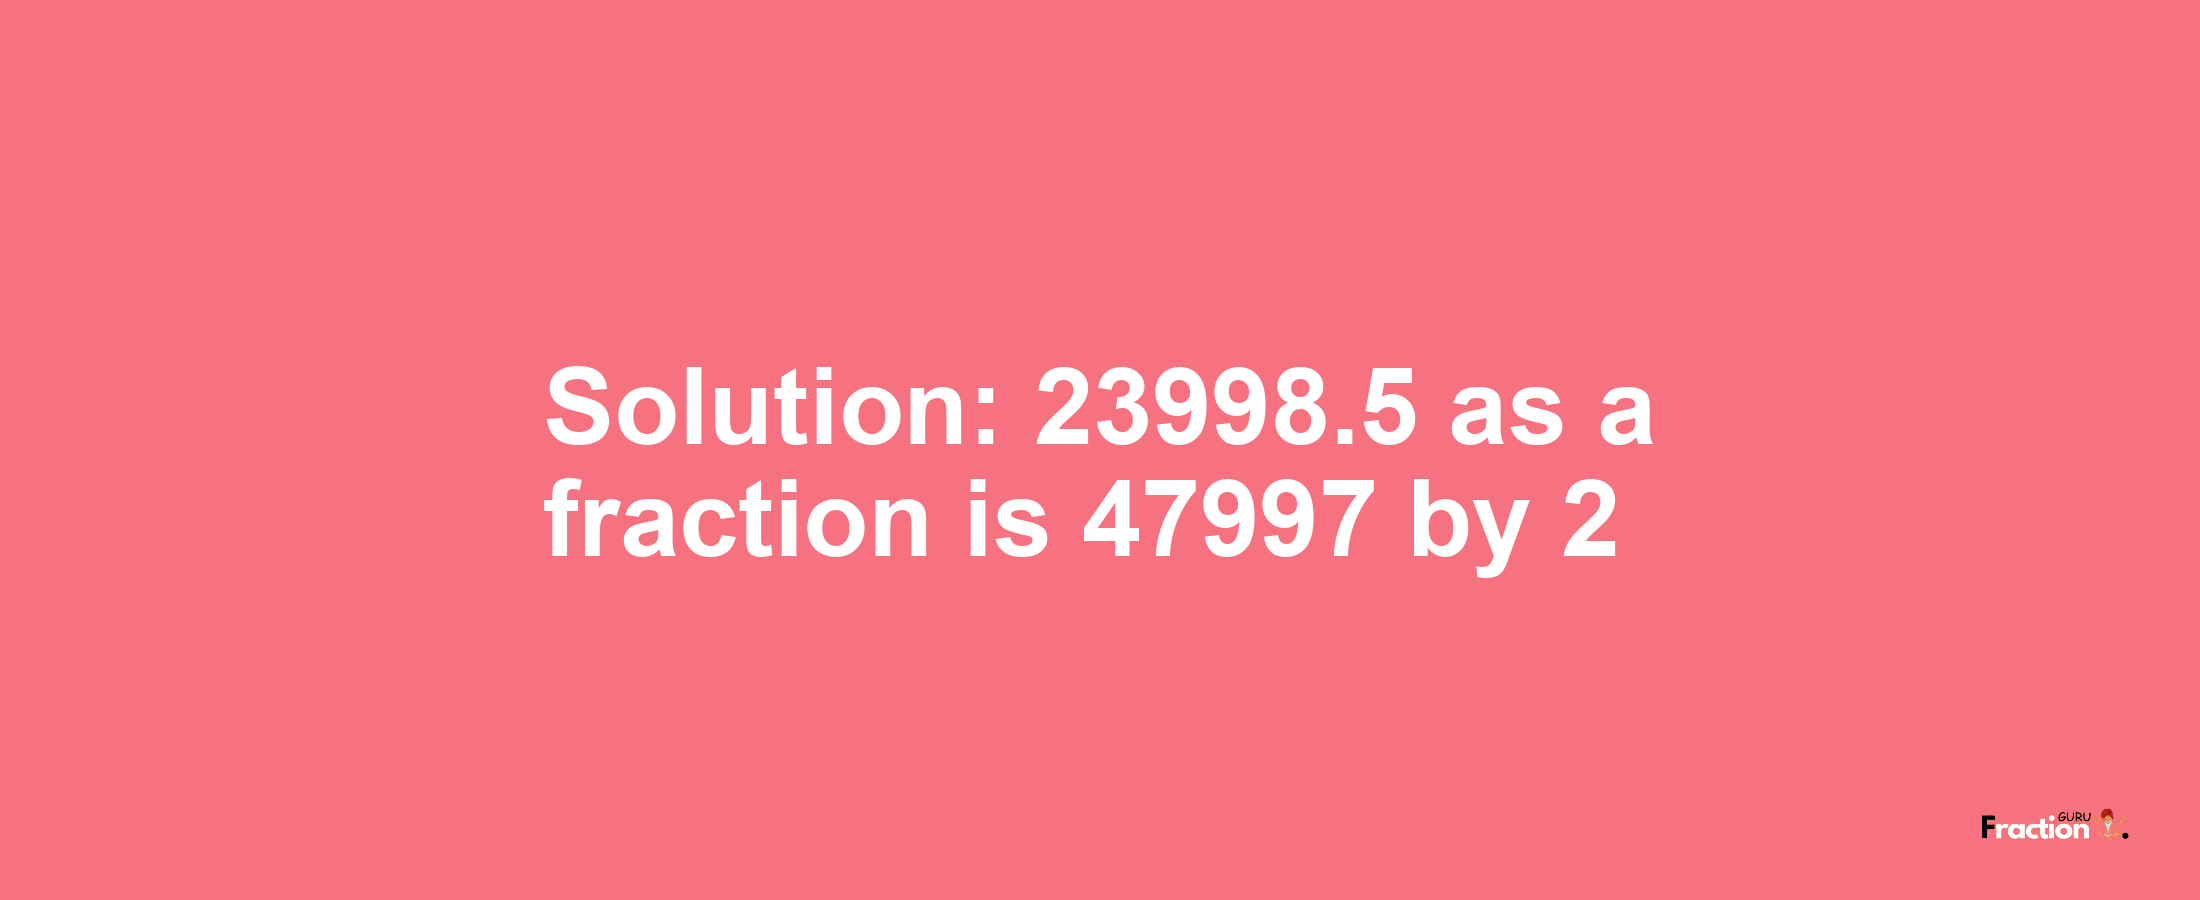 Solution:23998.5 as a fraction is 47997/2